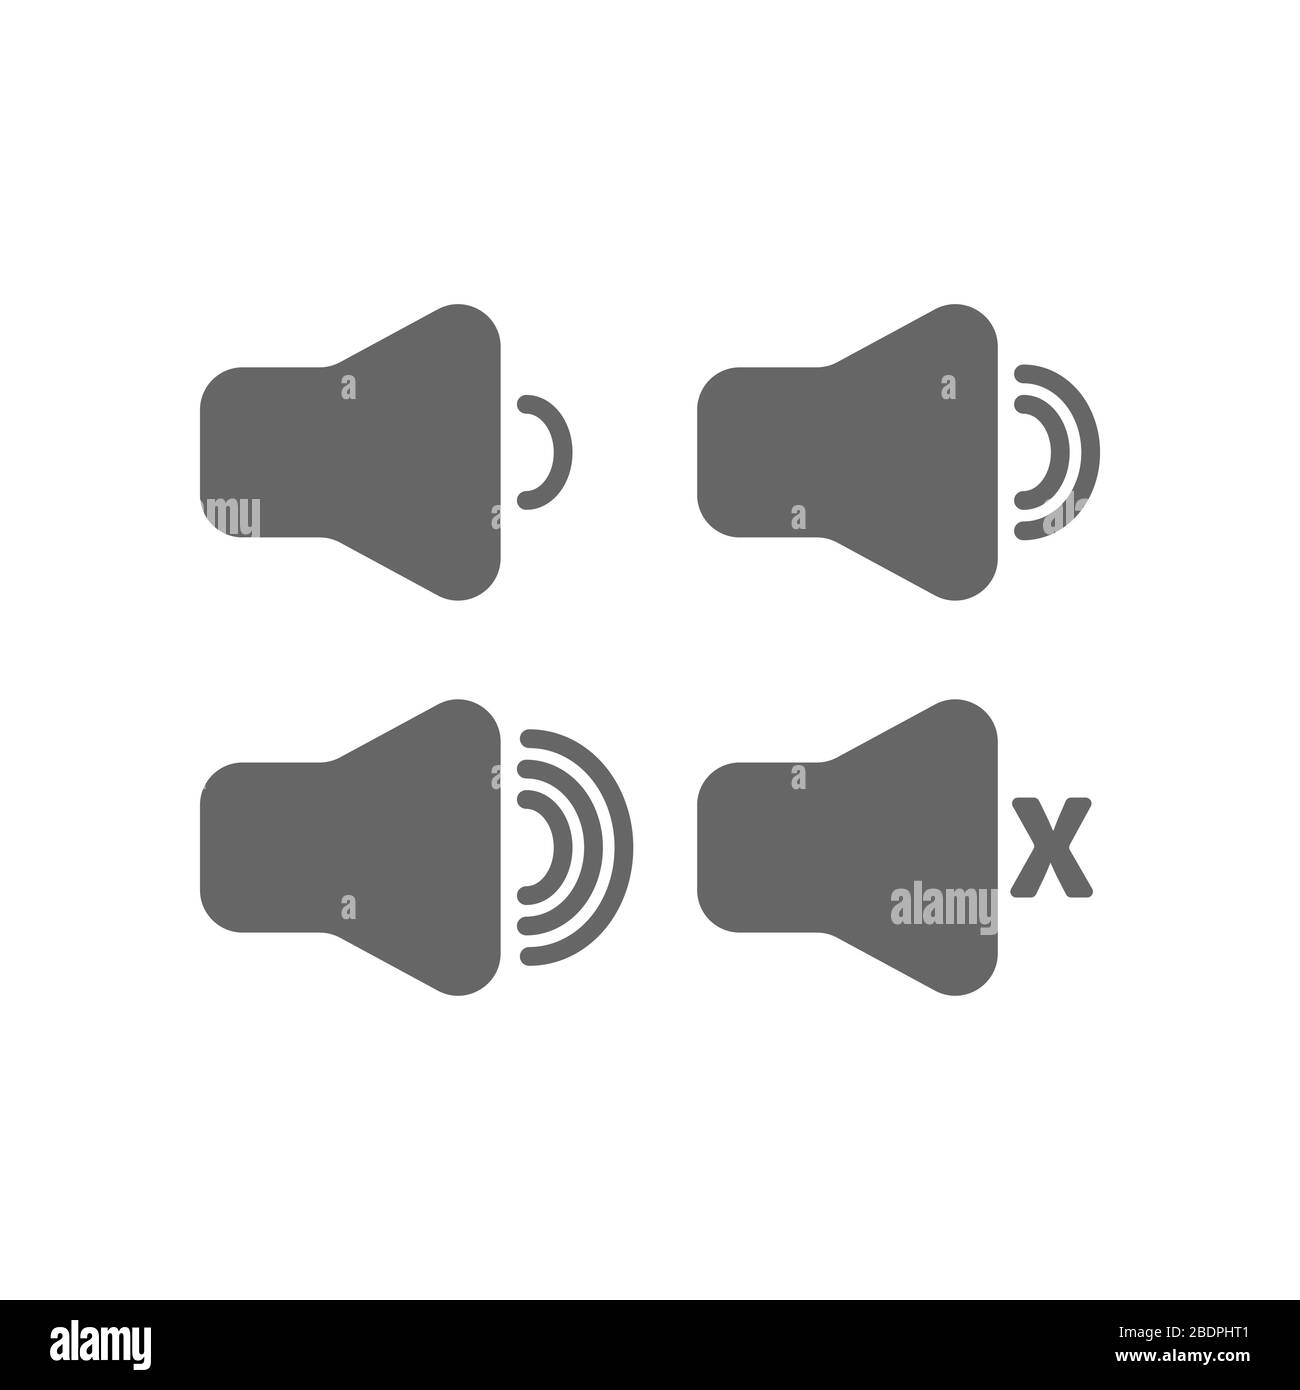 Speaker icon set. Volume control on/off mute symbol. Flat application interface sign. Vector illustration image. Isolated on white background. Stock Vector